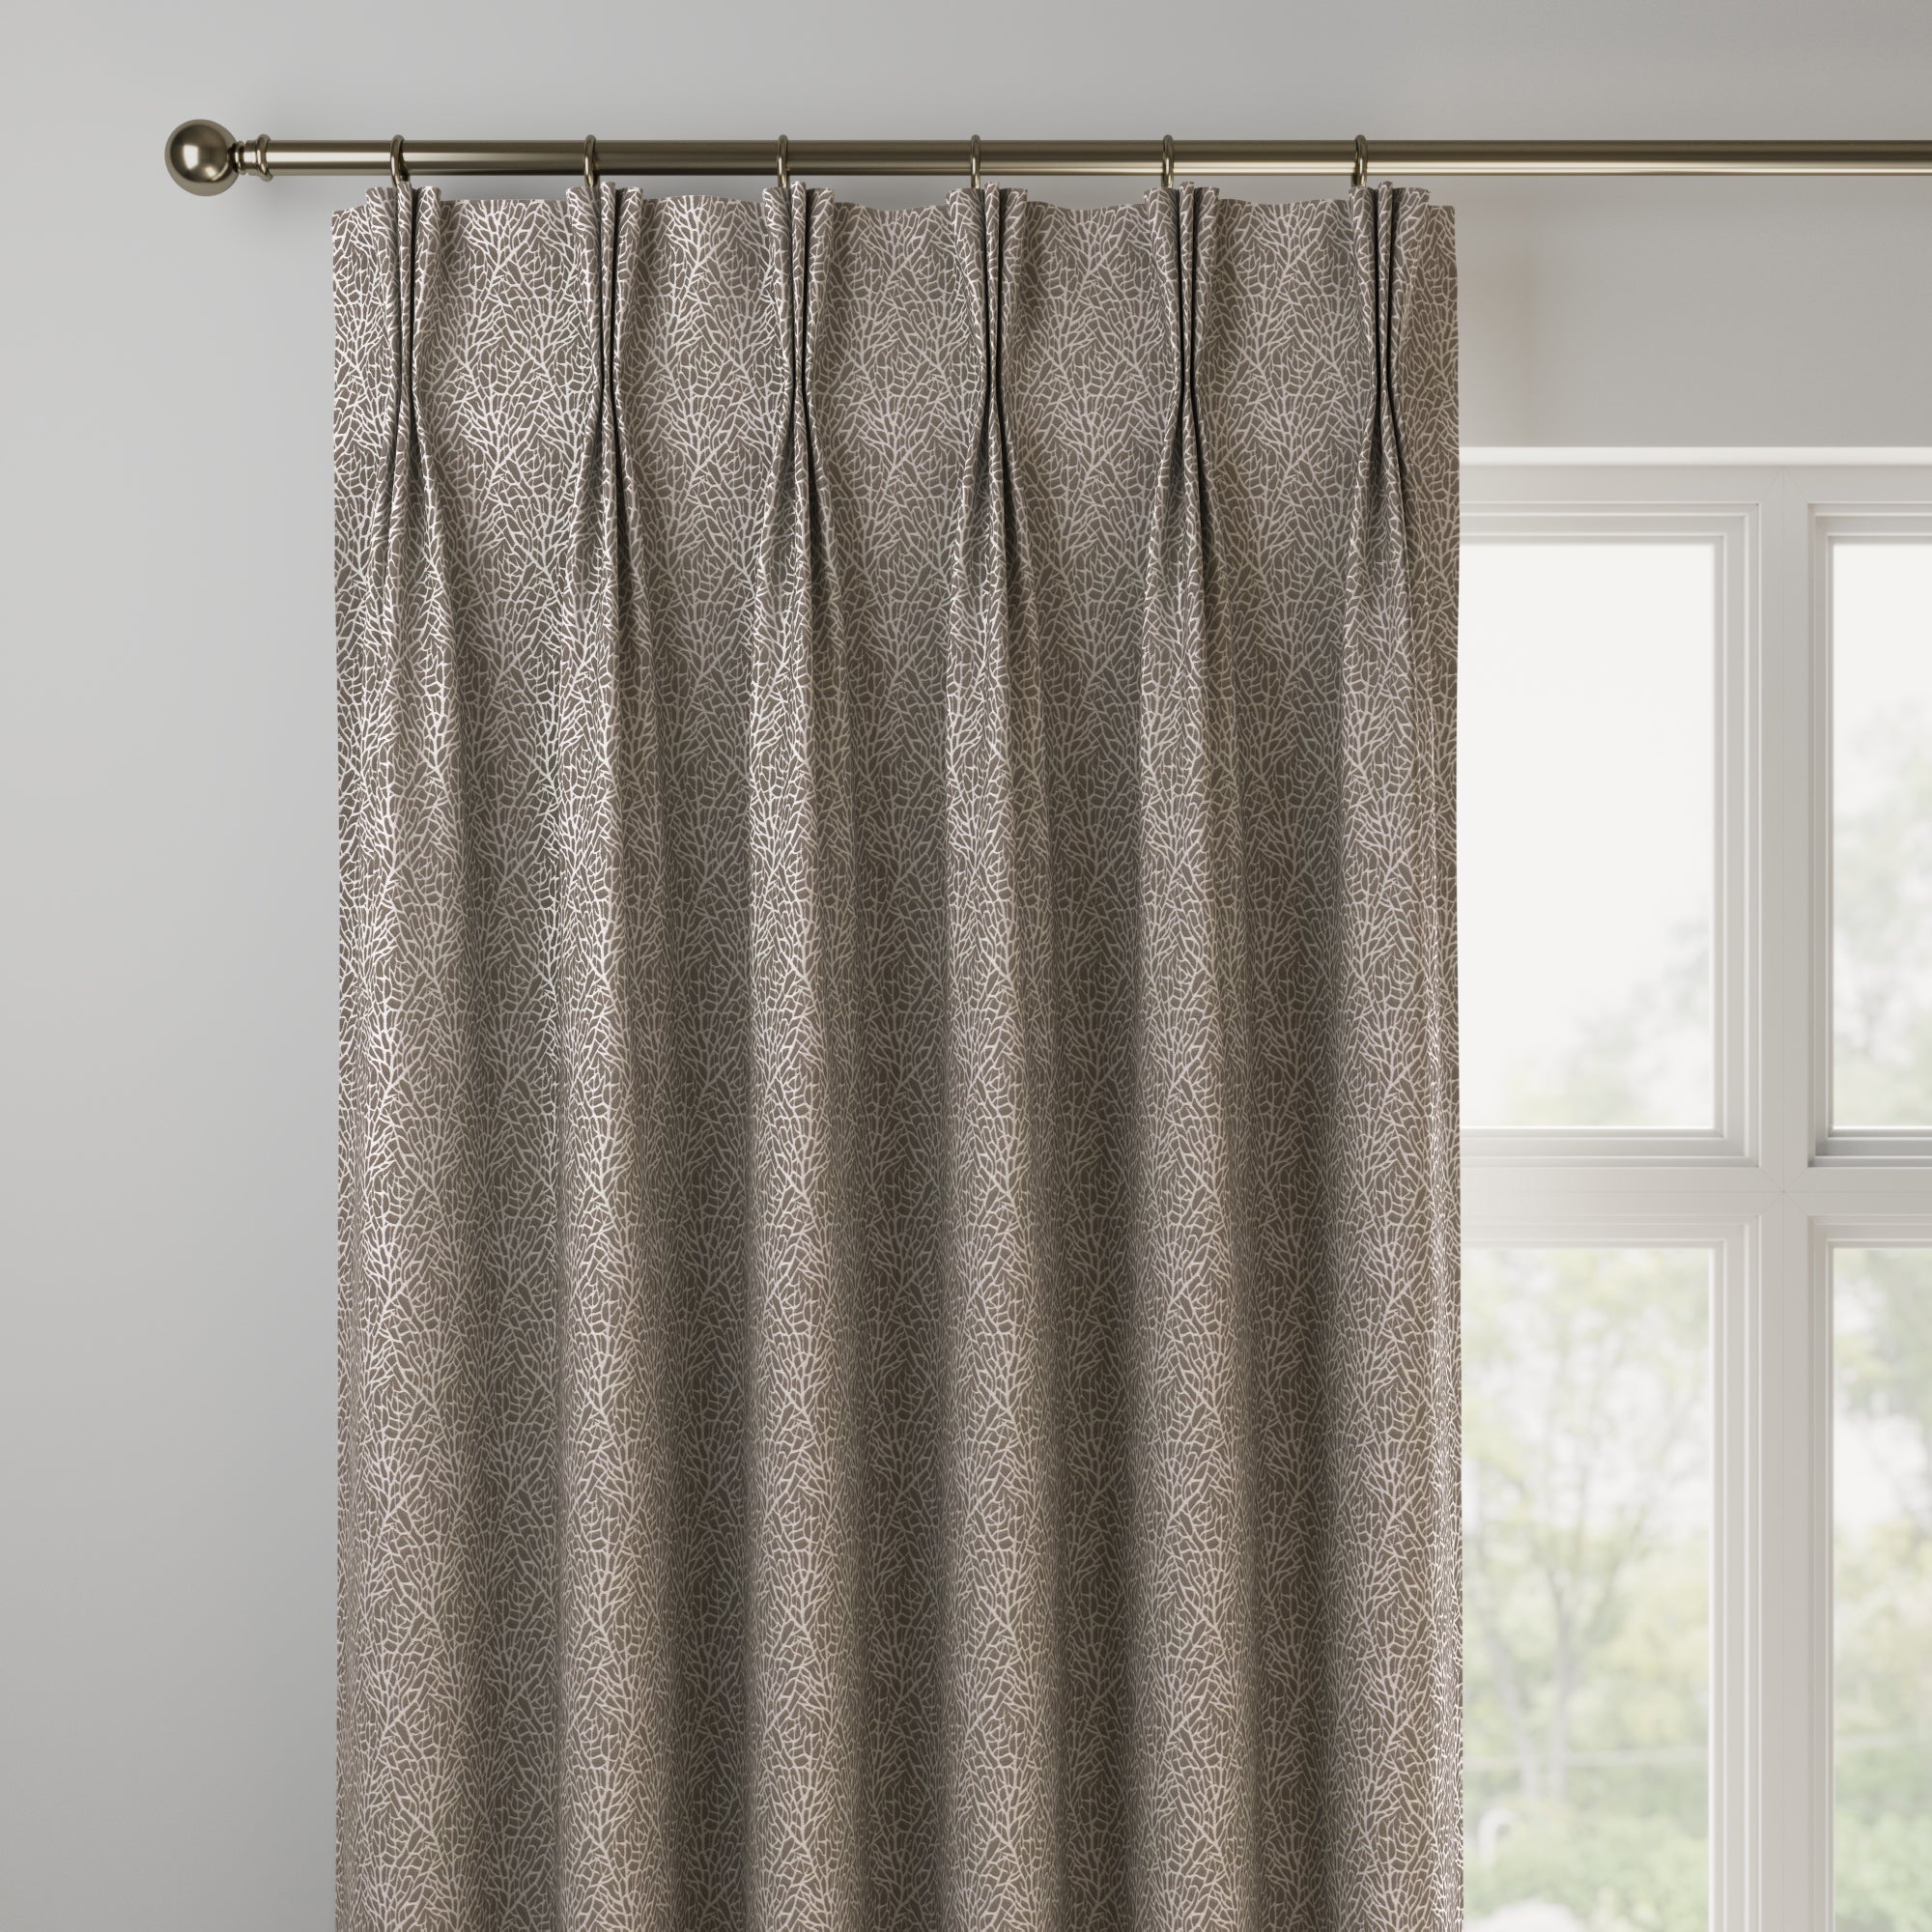 Reef Made to Measure Curtains Reef Grey